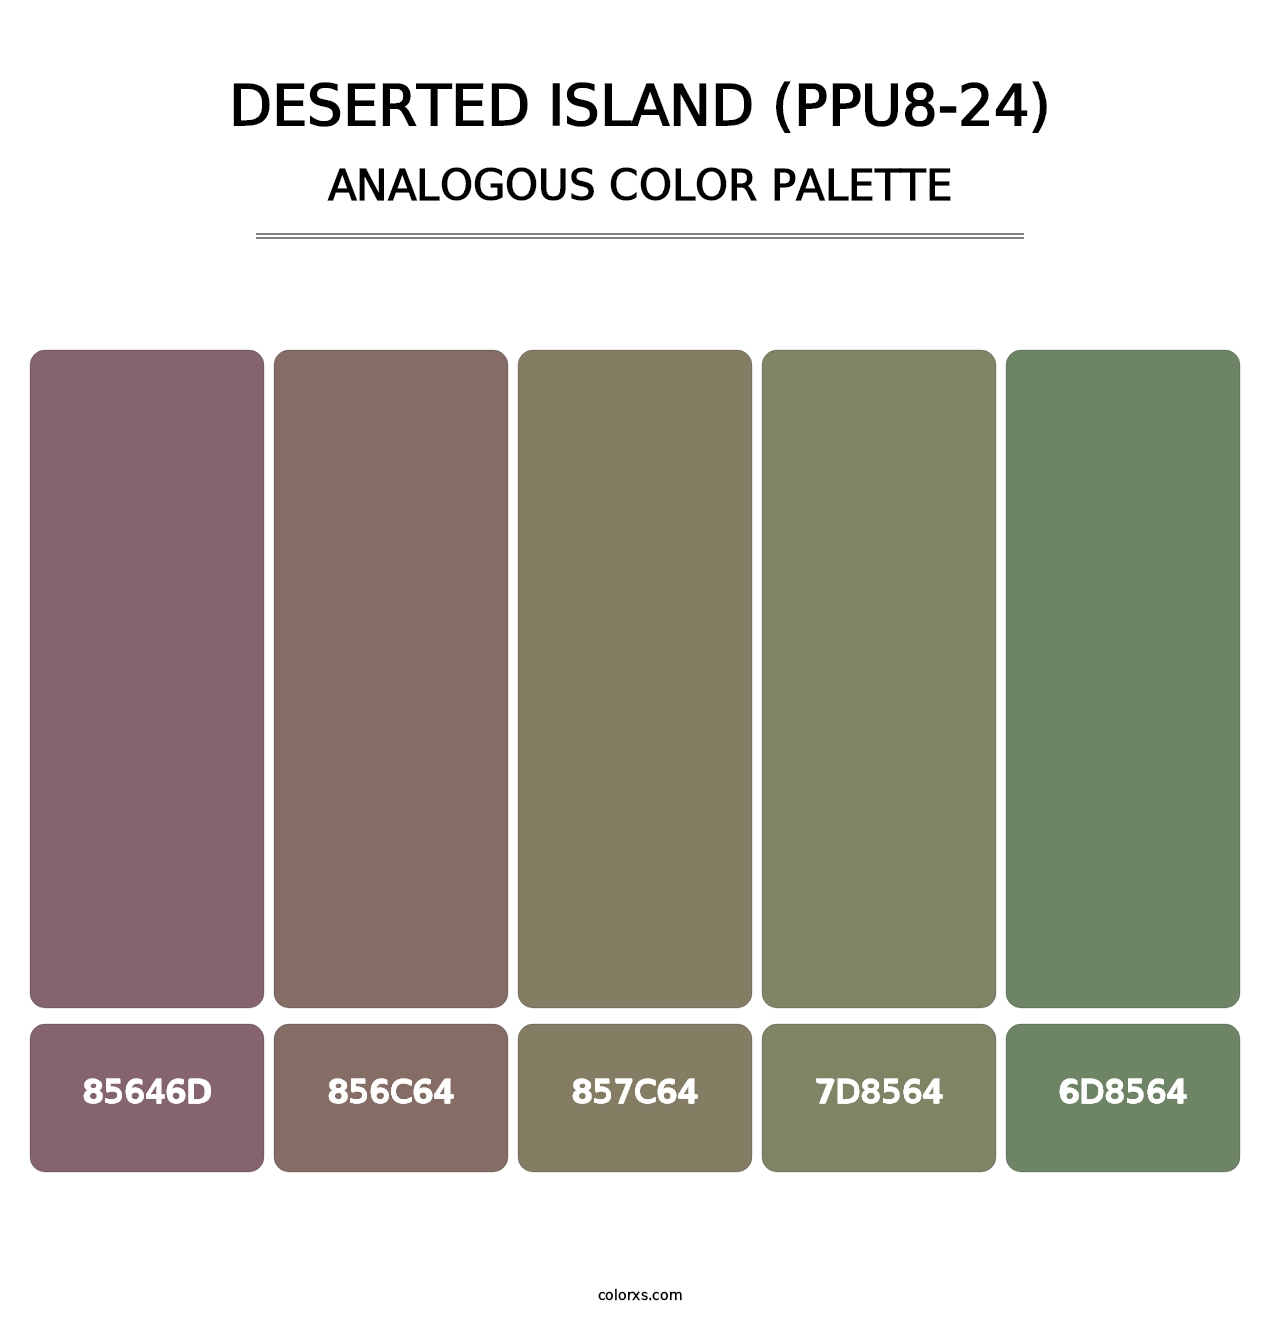 Deserted Island (PPU8-24) - Analogous Color Palette